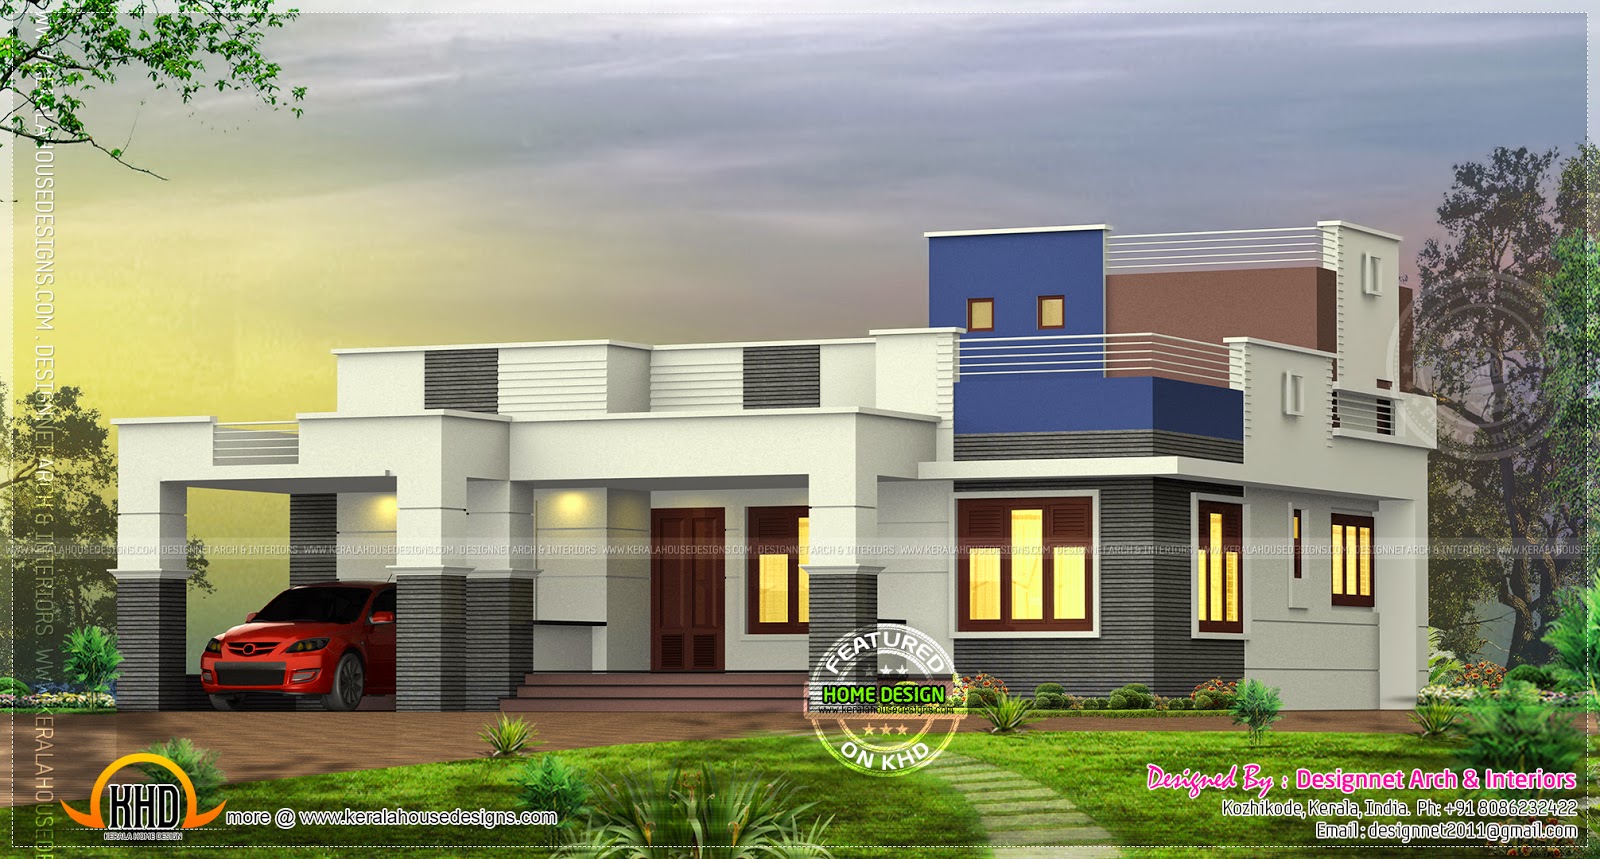 3 bedroom single storied in 1500 sq.feet - Kerala home design and ...